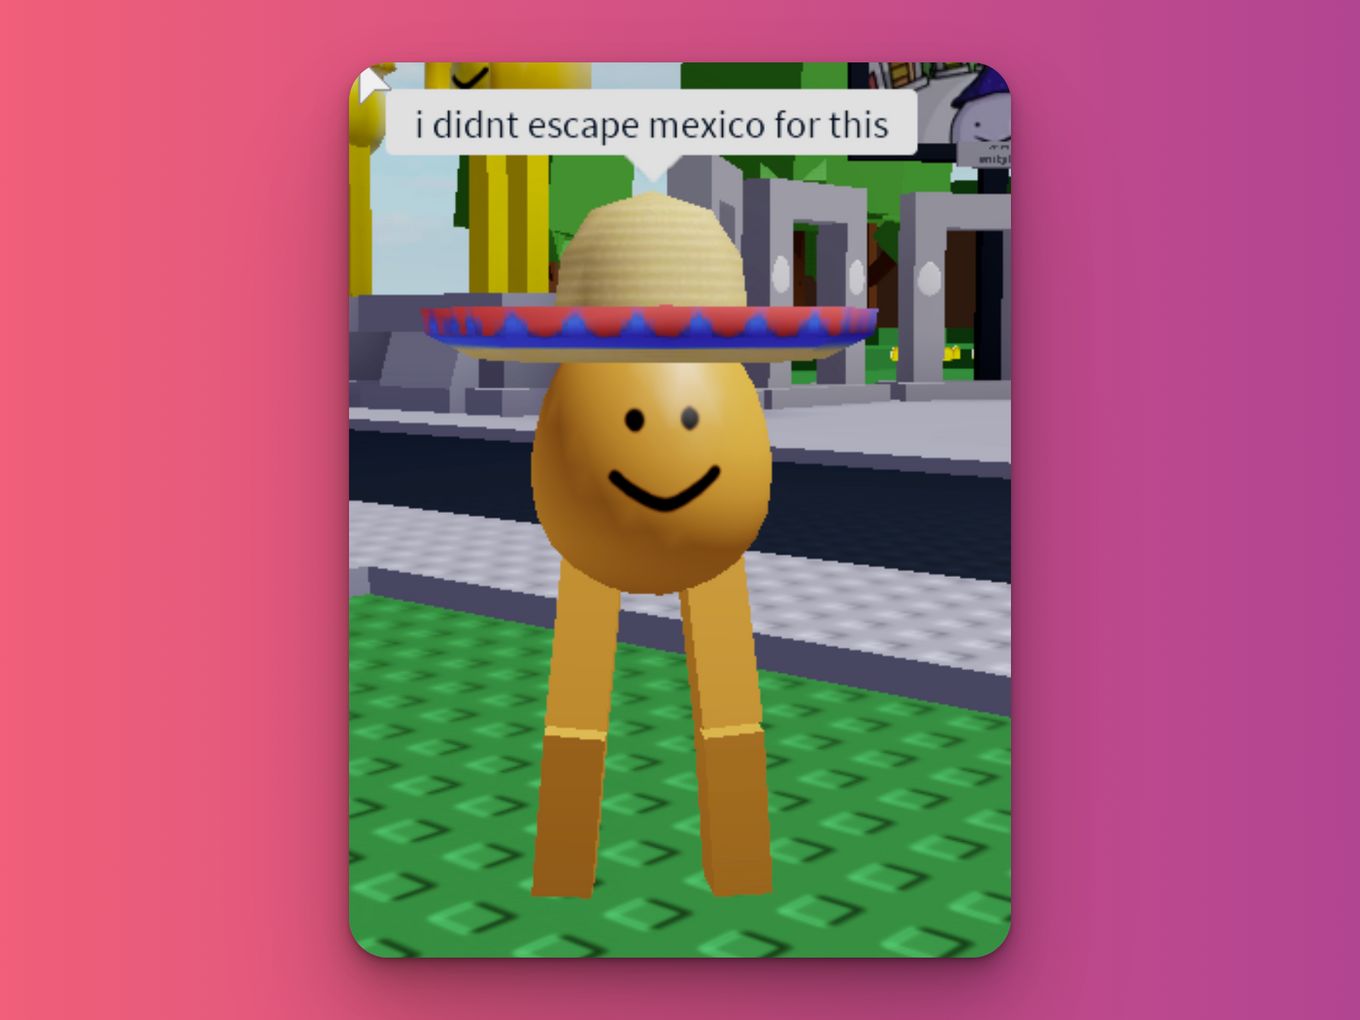 I didn't scape Mexico for this - Cursed Roblox Meme